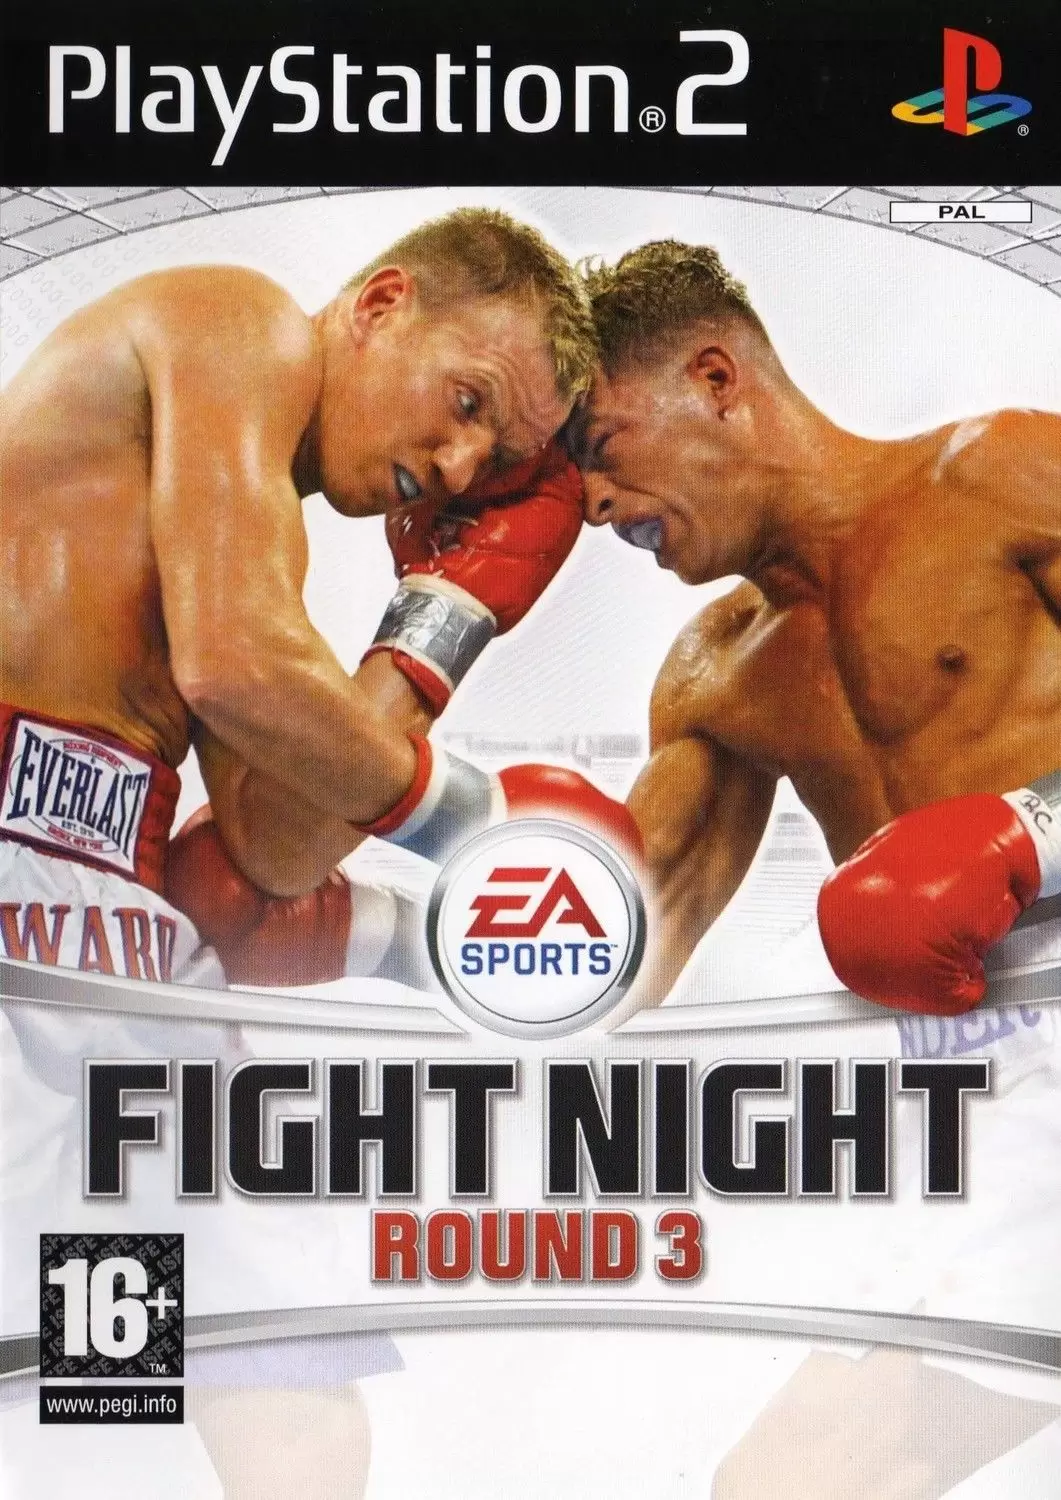 PS2 Games - Fight Night Round 3